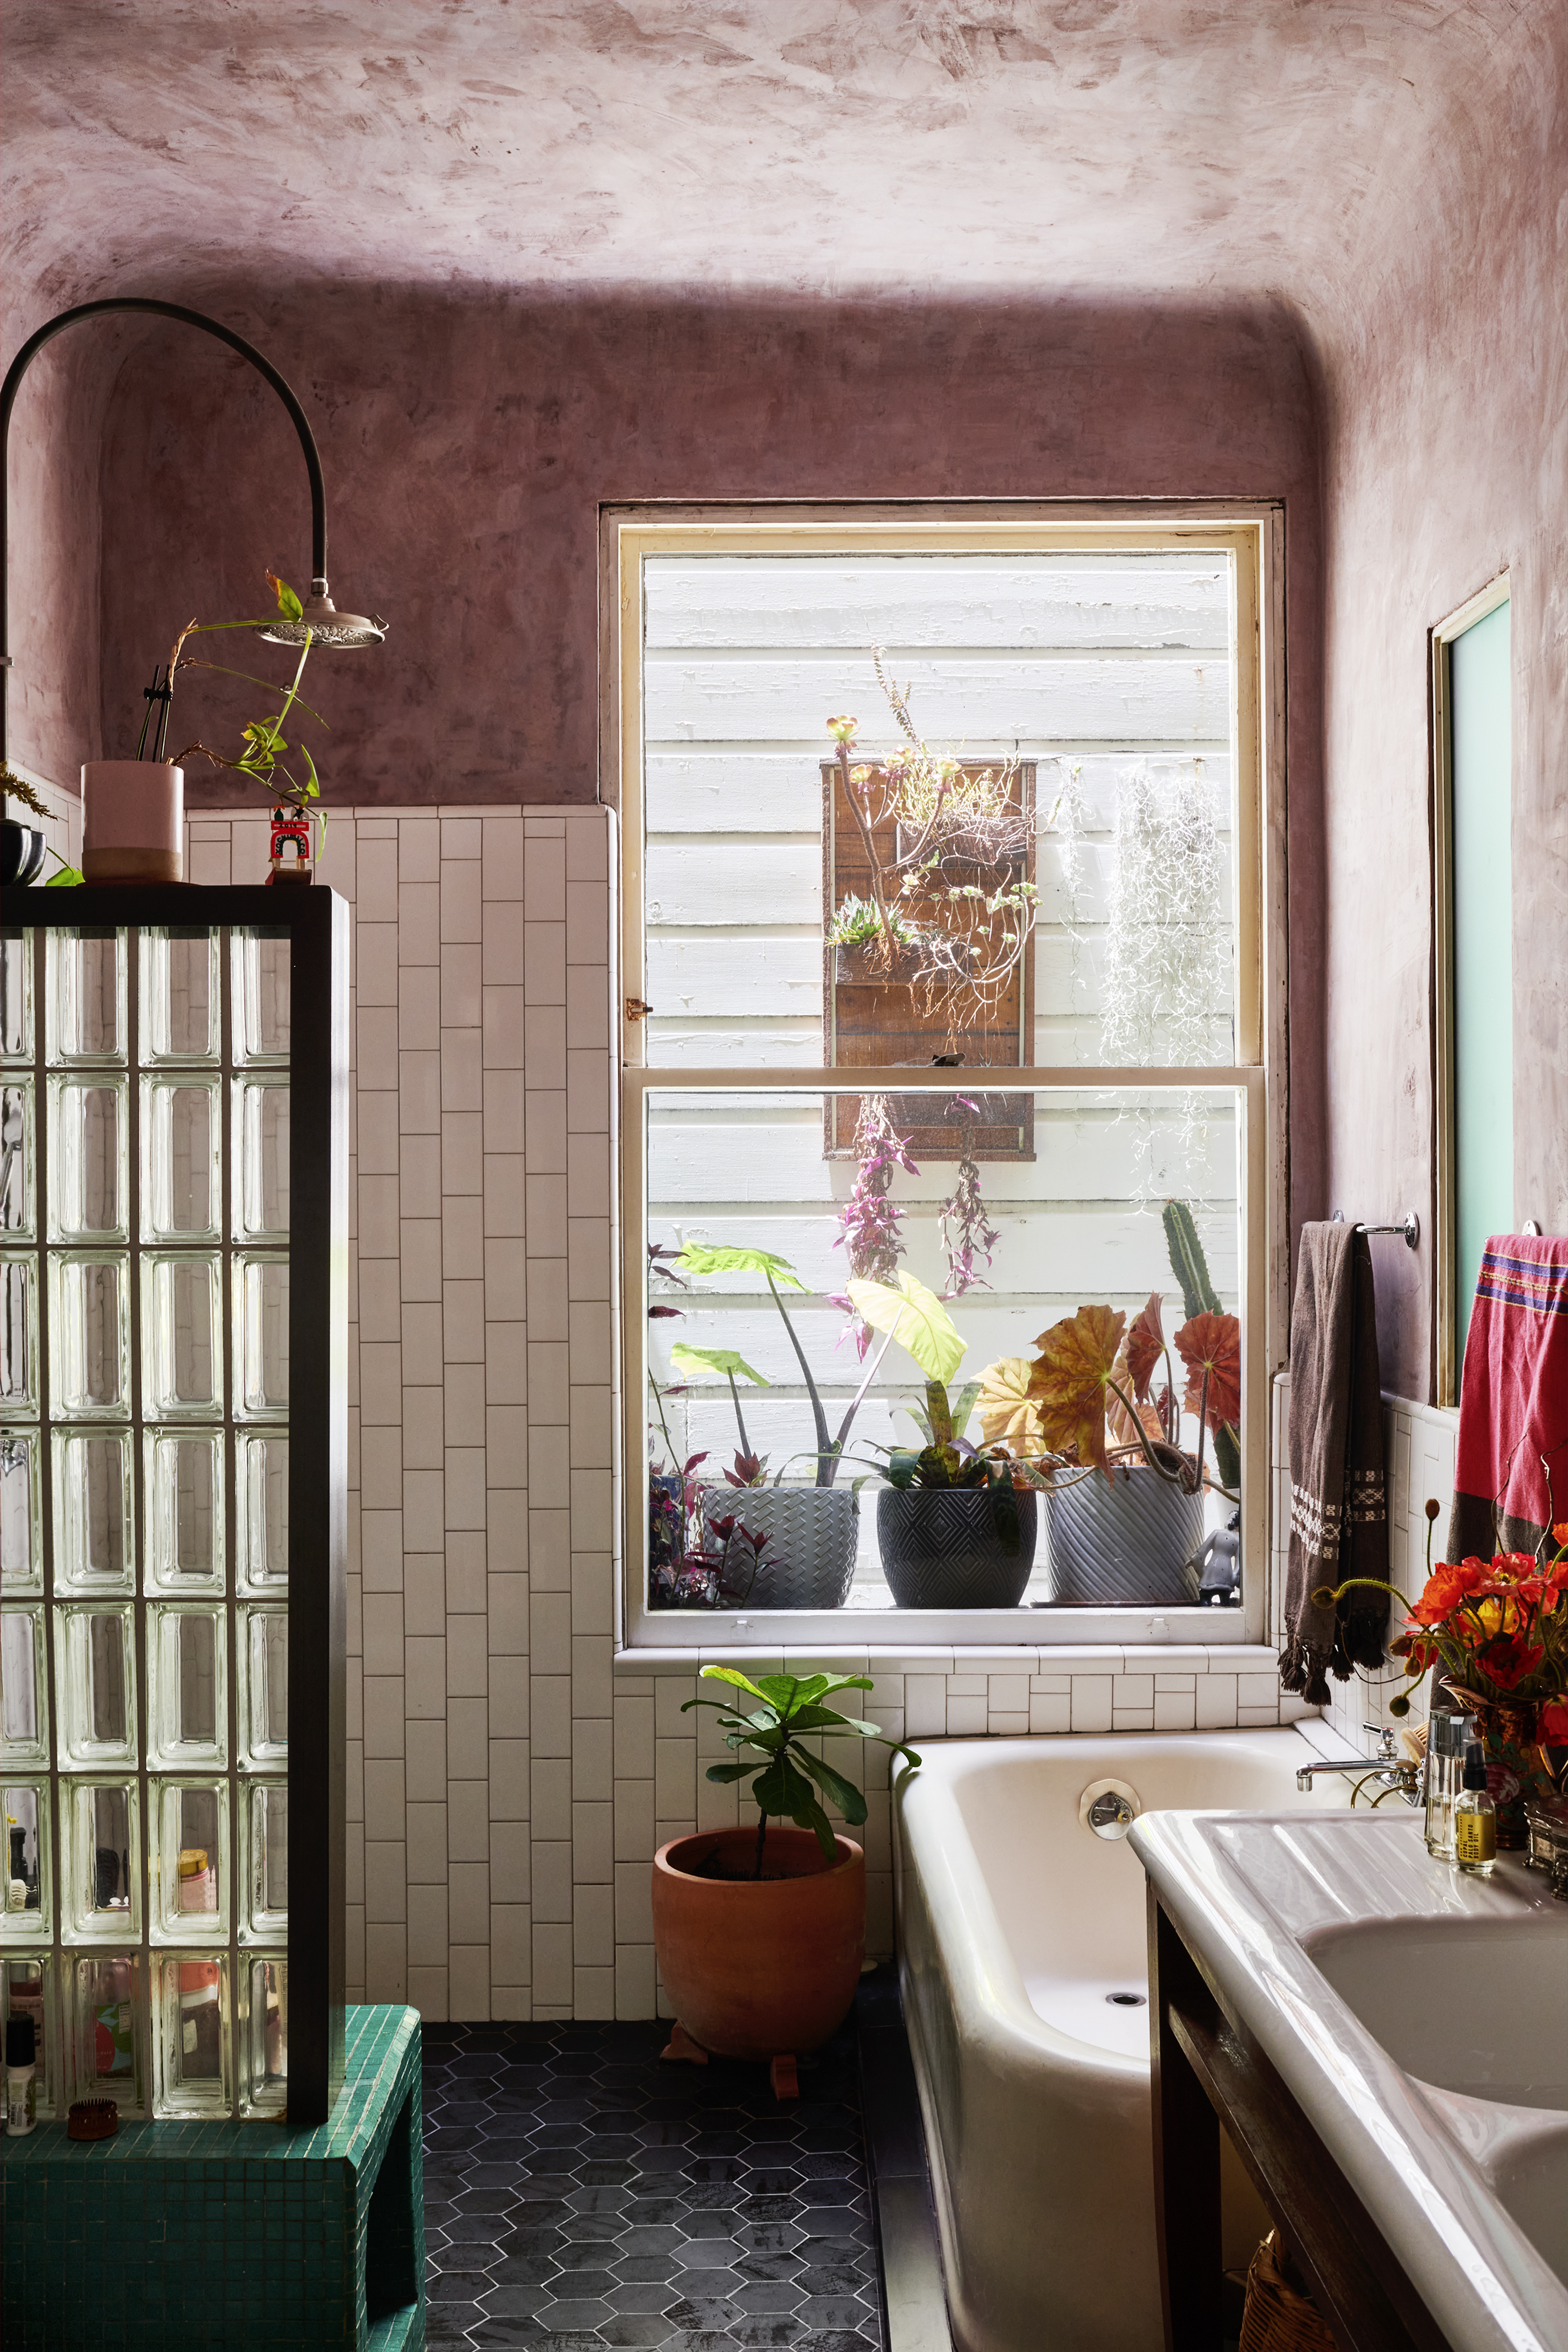 The bathroom features a pinkish ceiling, tiled walls, a glass block divider and a bathtub. A window showcases various potted plants and hanging decorations with colorful towels.